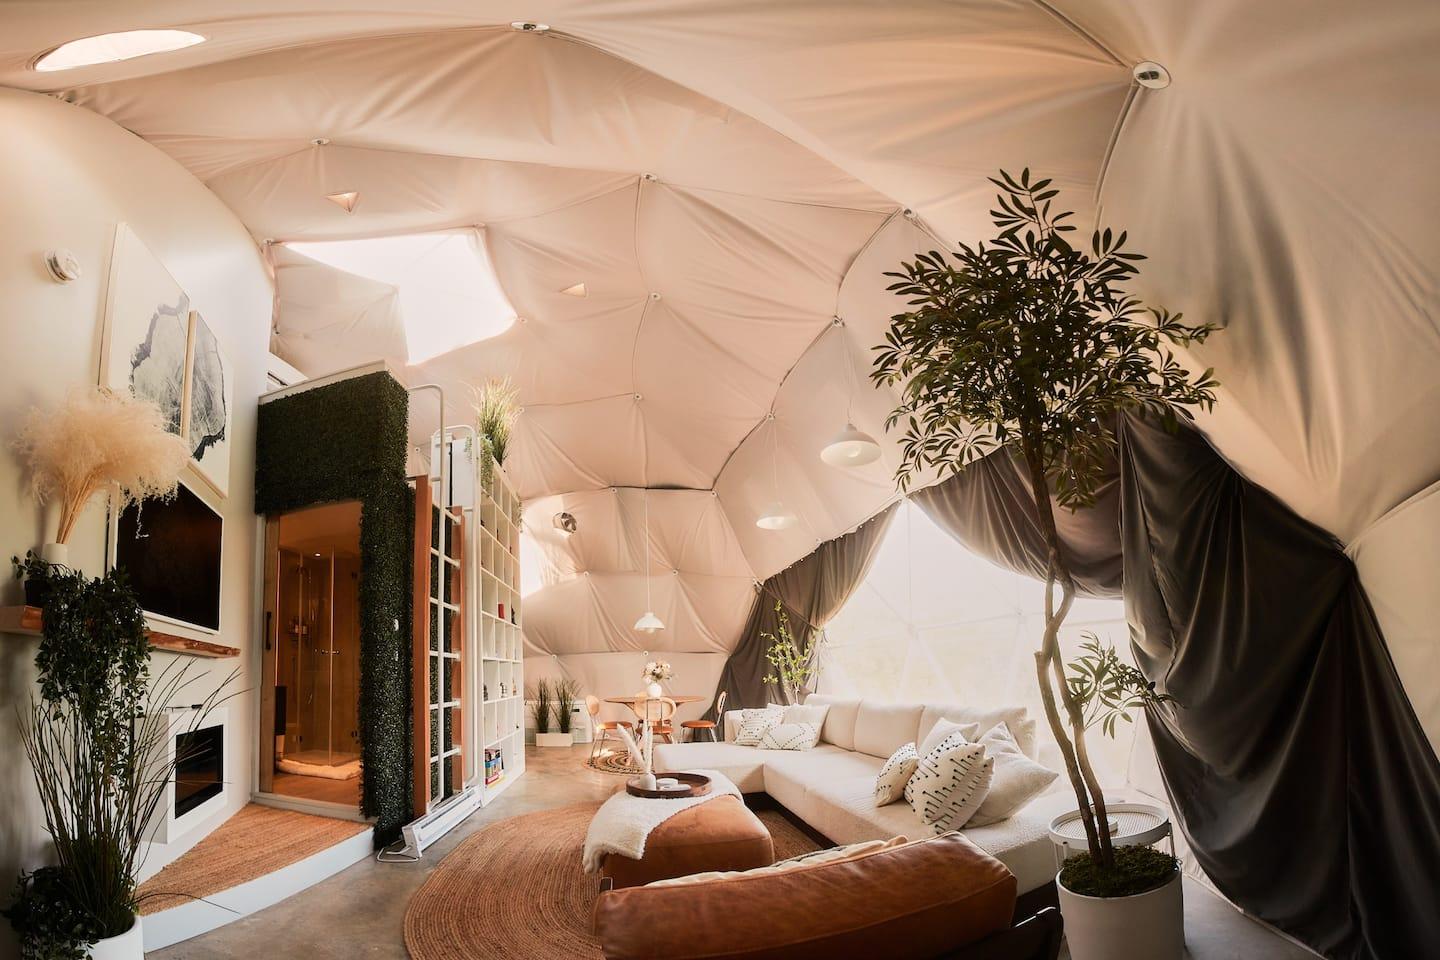 interior of geodesic dome with view of sofa, module and insulation